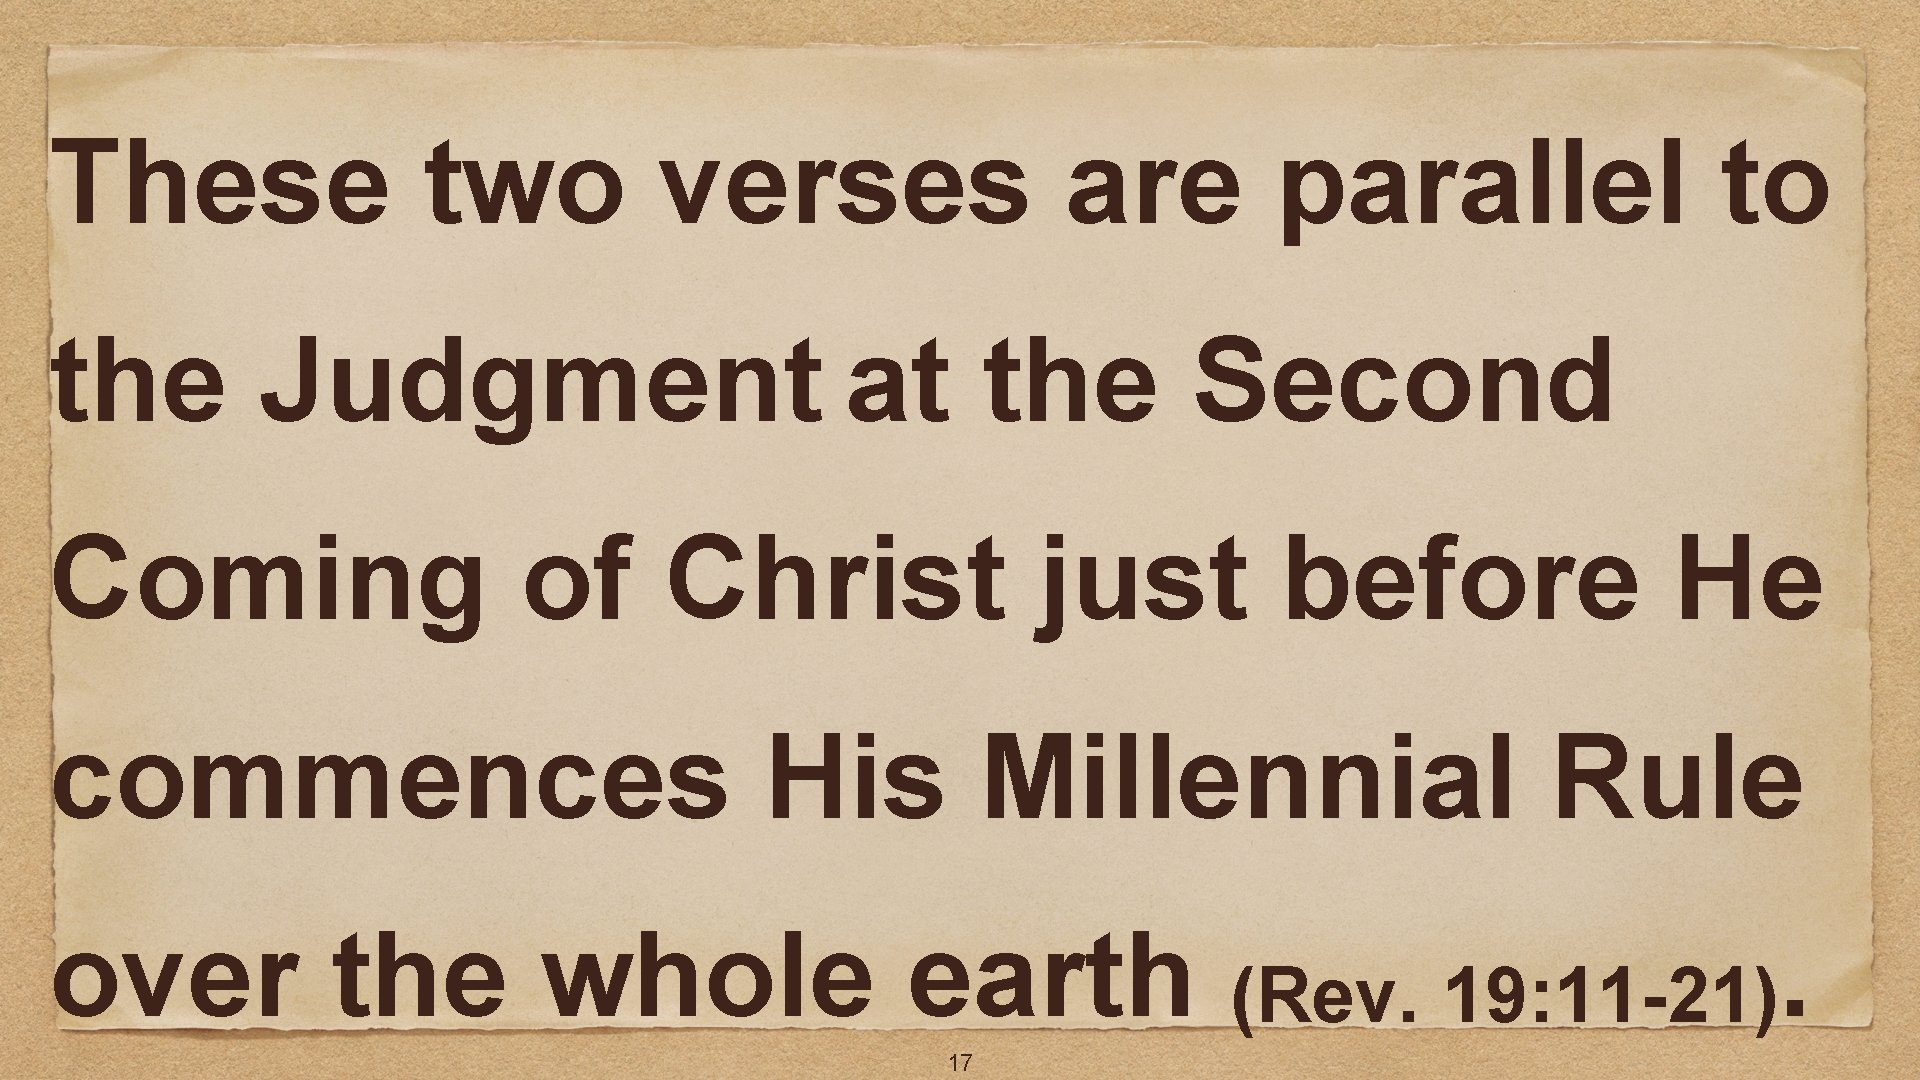 These two verses are parallel to the Judgment at the Second Coming of Christ